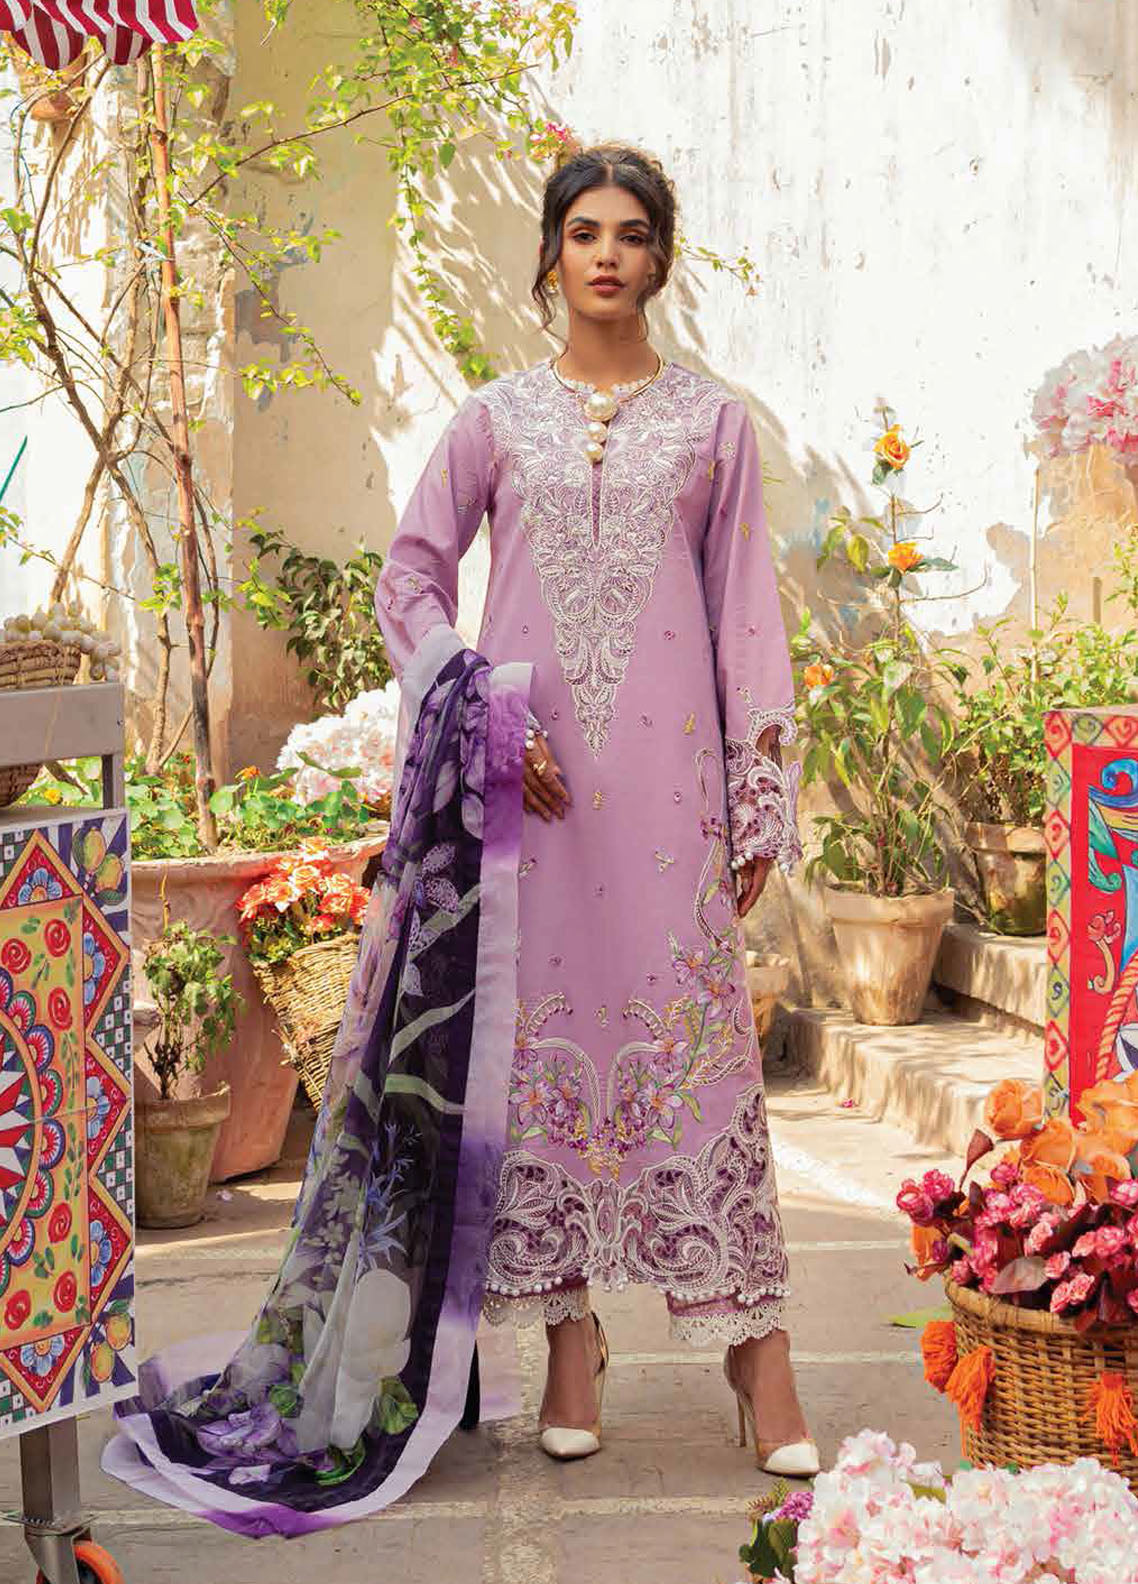 Hemline by Mushq Embroidered Lawn Suits Unstitched 3 Piece MQ23HMS HML23-4A FLAVIA - Spring / Summer Collection